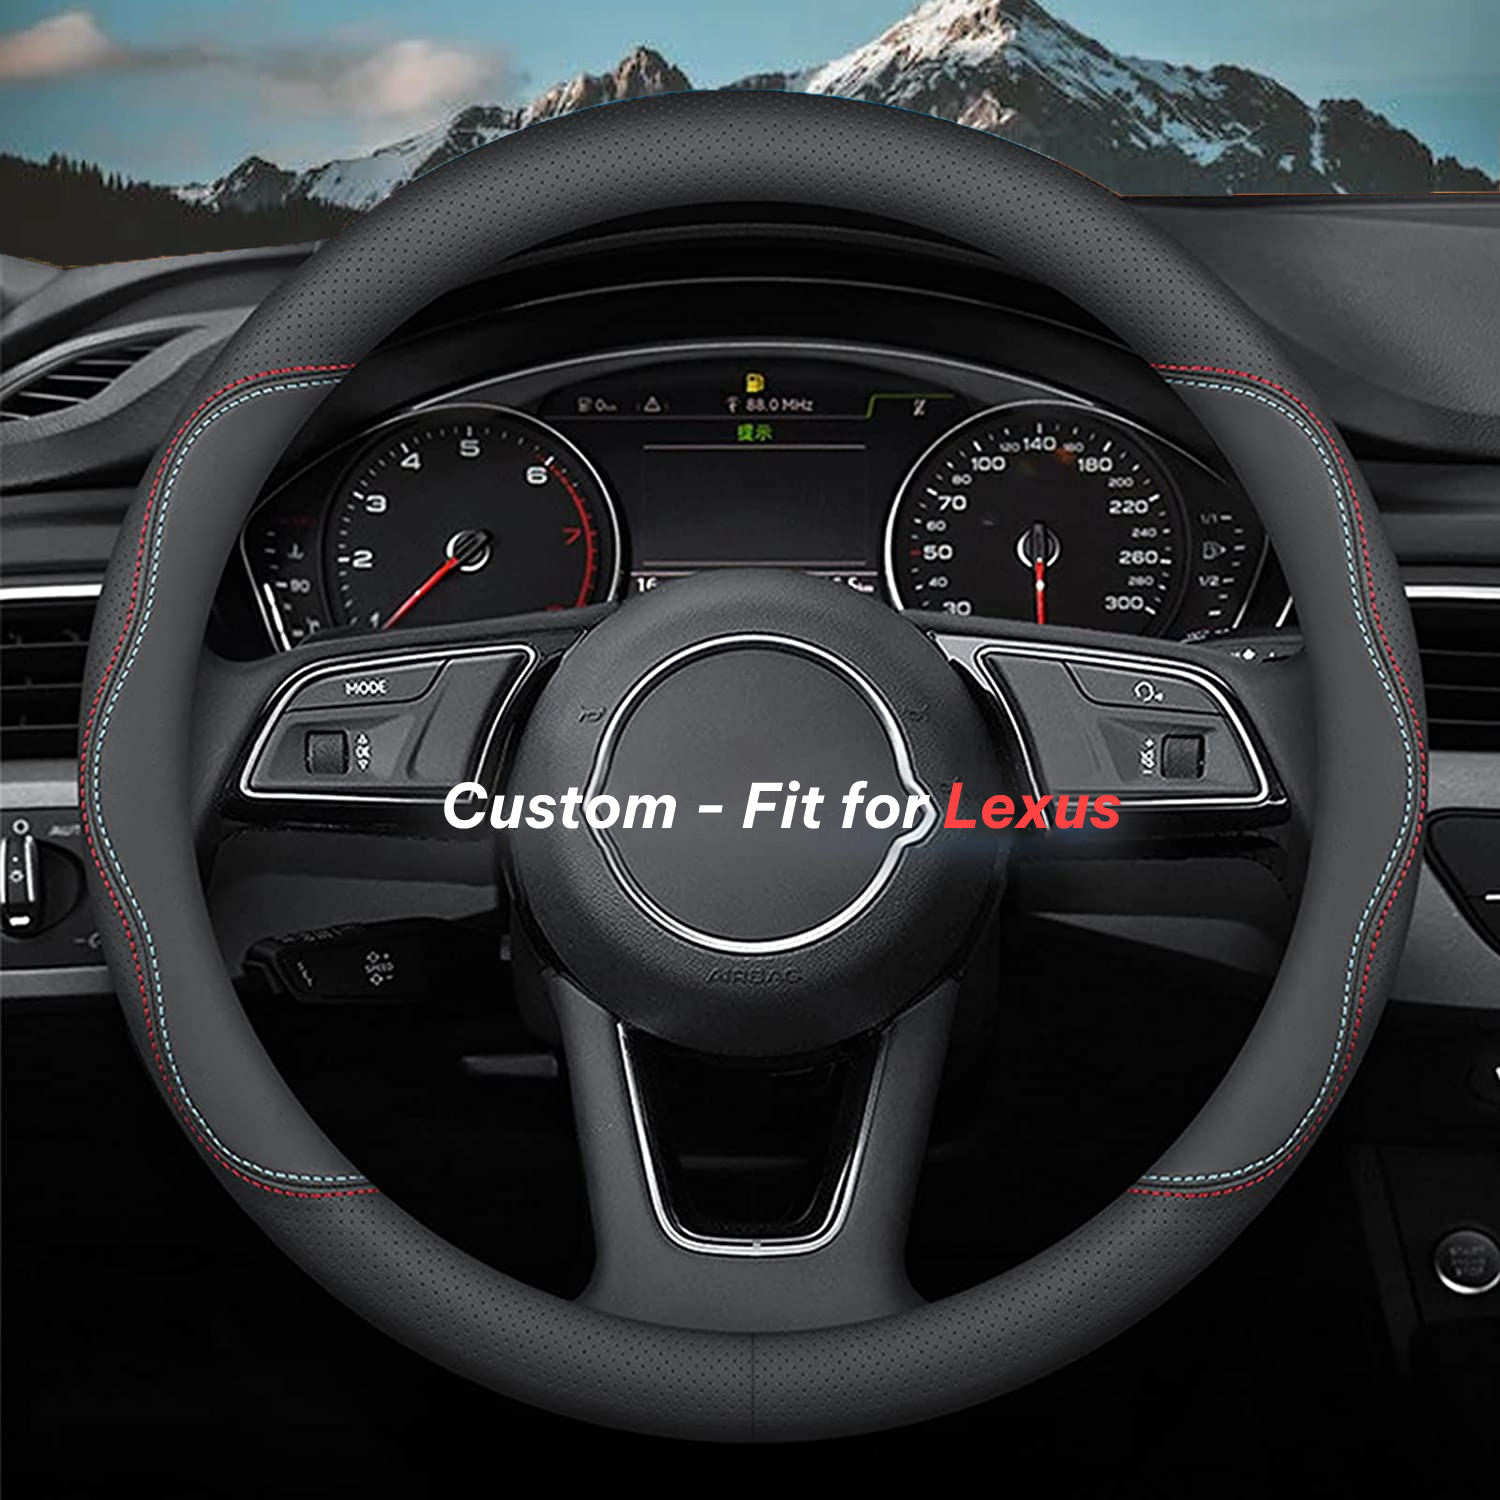 Car Steering Wheel Cover 2024 Update Version, Custom-Fit for Car, Premium Leather Car Steering Wheel Cover with Logo, Car Accessories DLFJ222